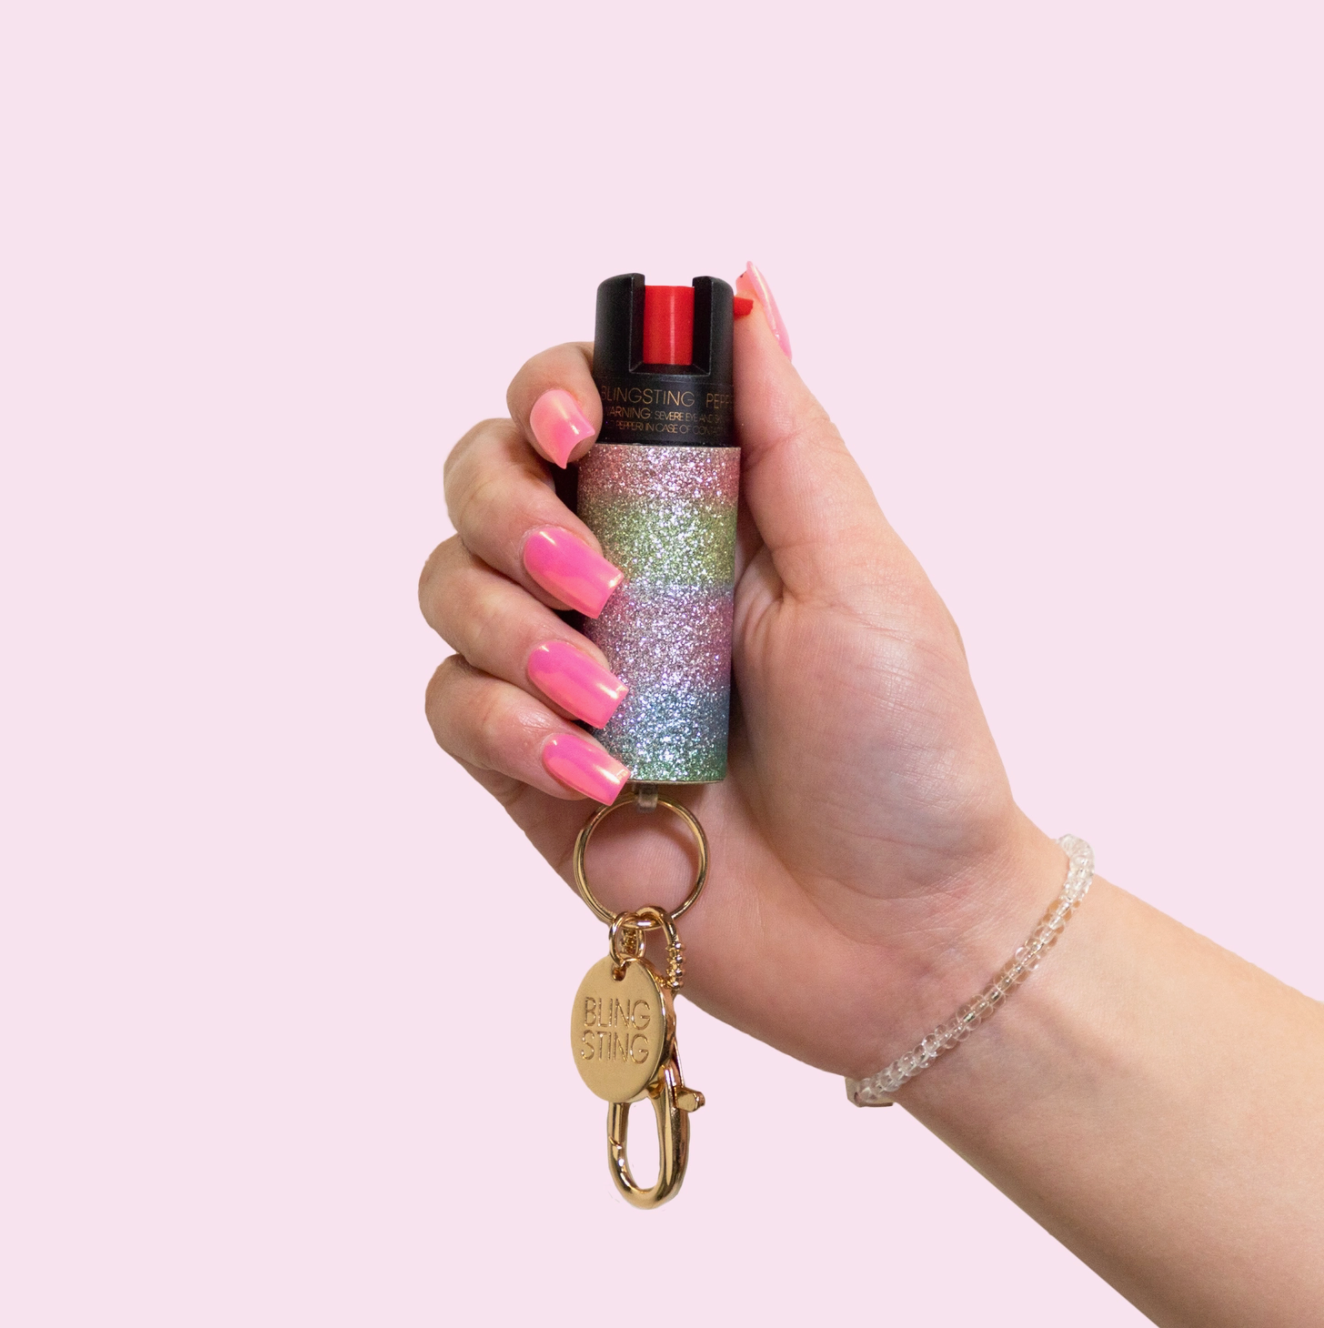 BlingSting Pepper Spray – CoutureCollective